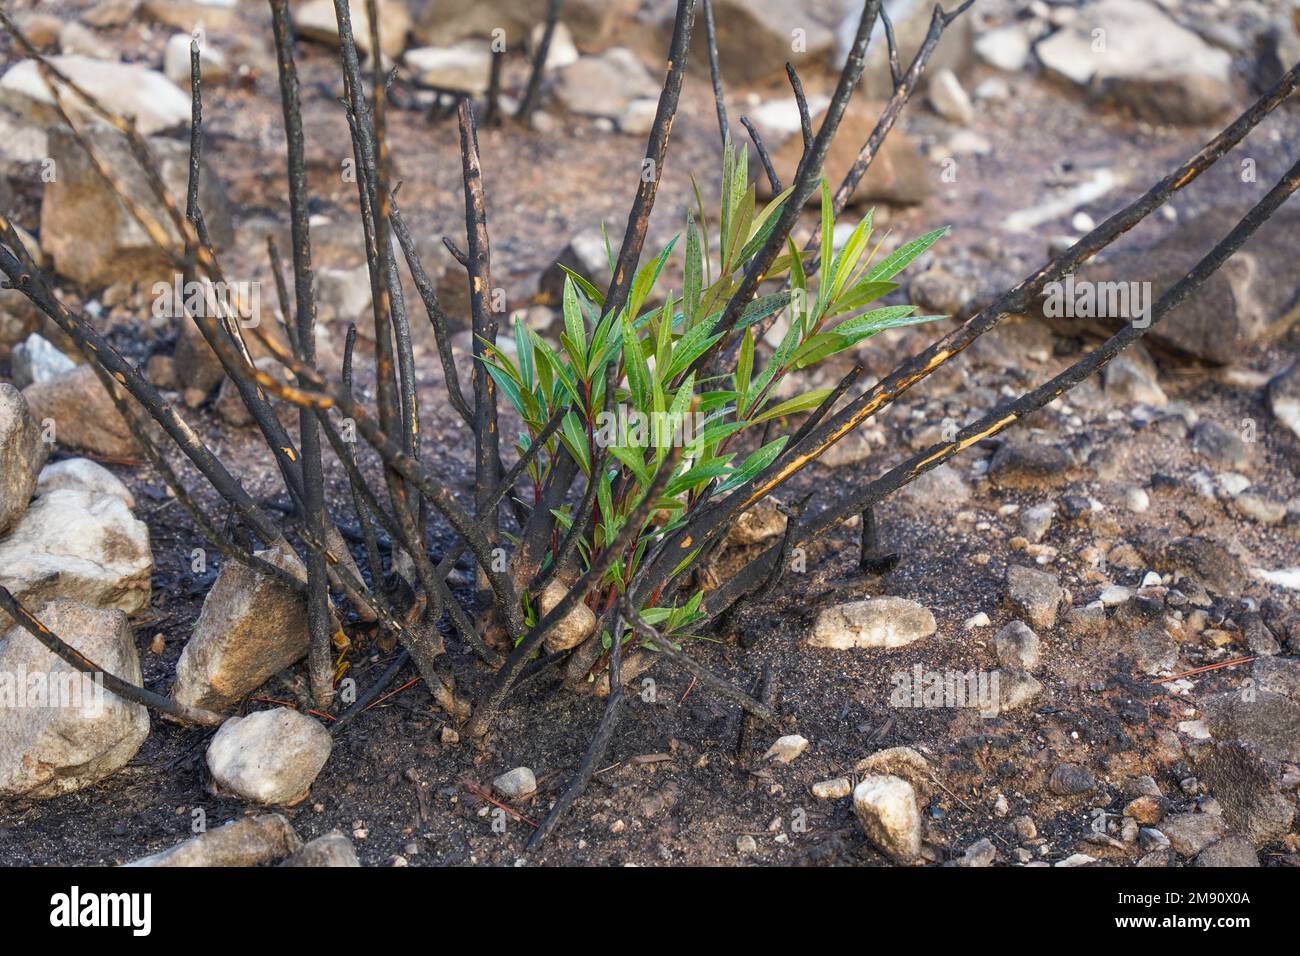 Bush growing back, regenerating, after wildfire, Spain. Stock Photo